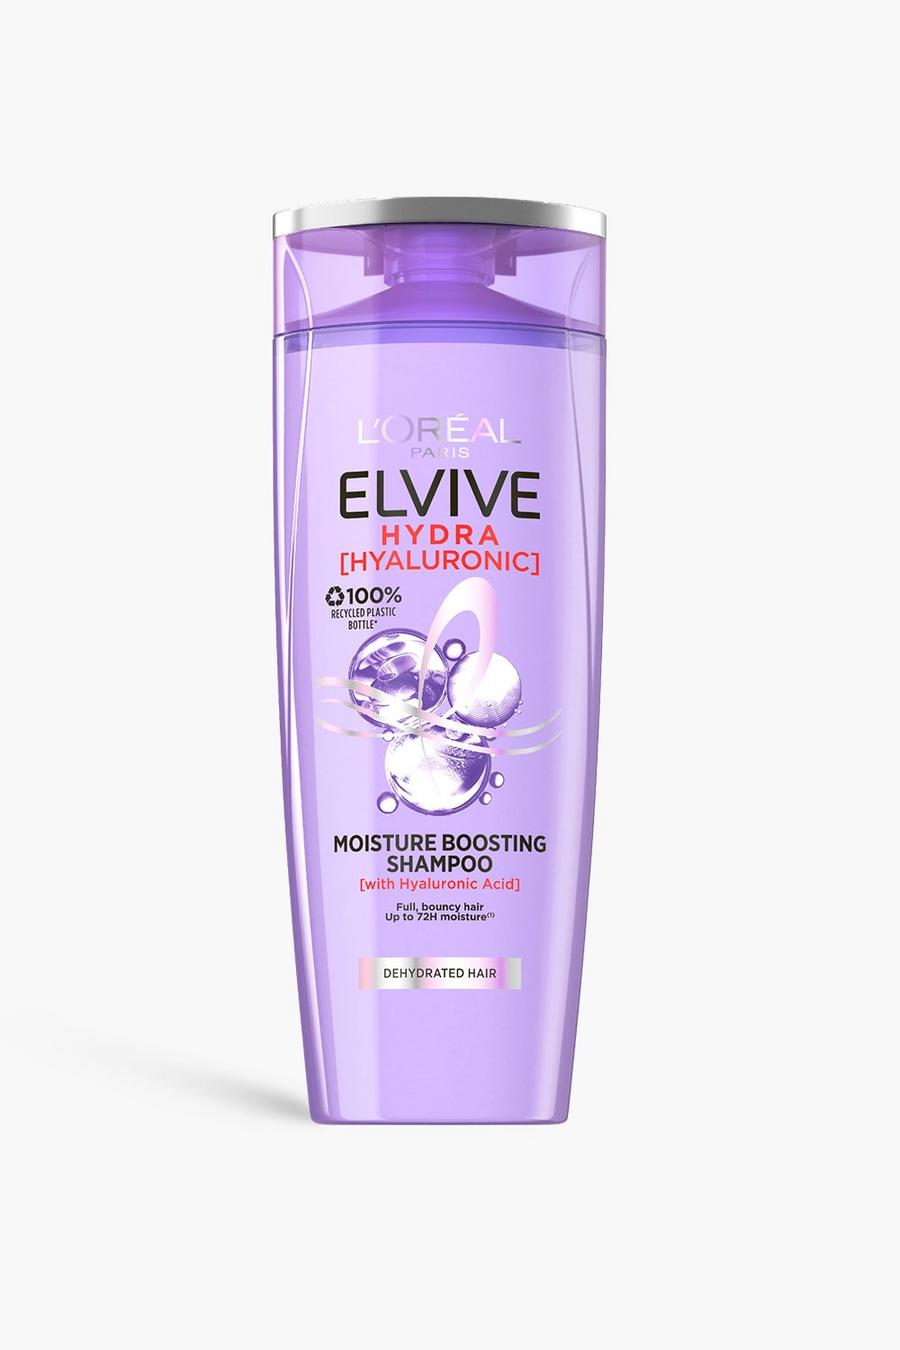 White L'Oreal Elvive Hydra Hyaluronic Acid Shampoo , moisturising for dehydrated hair image number 1